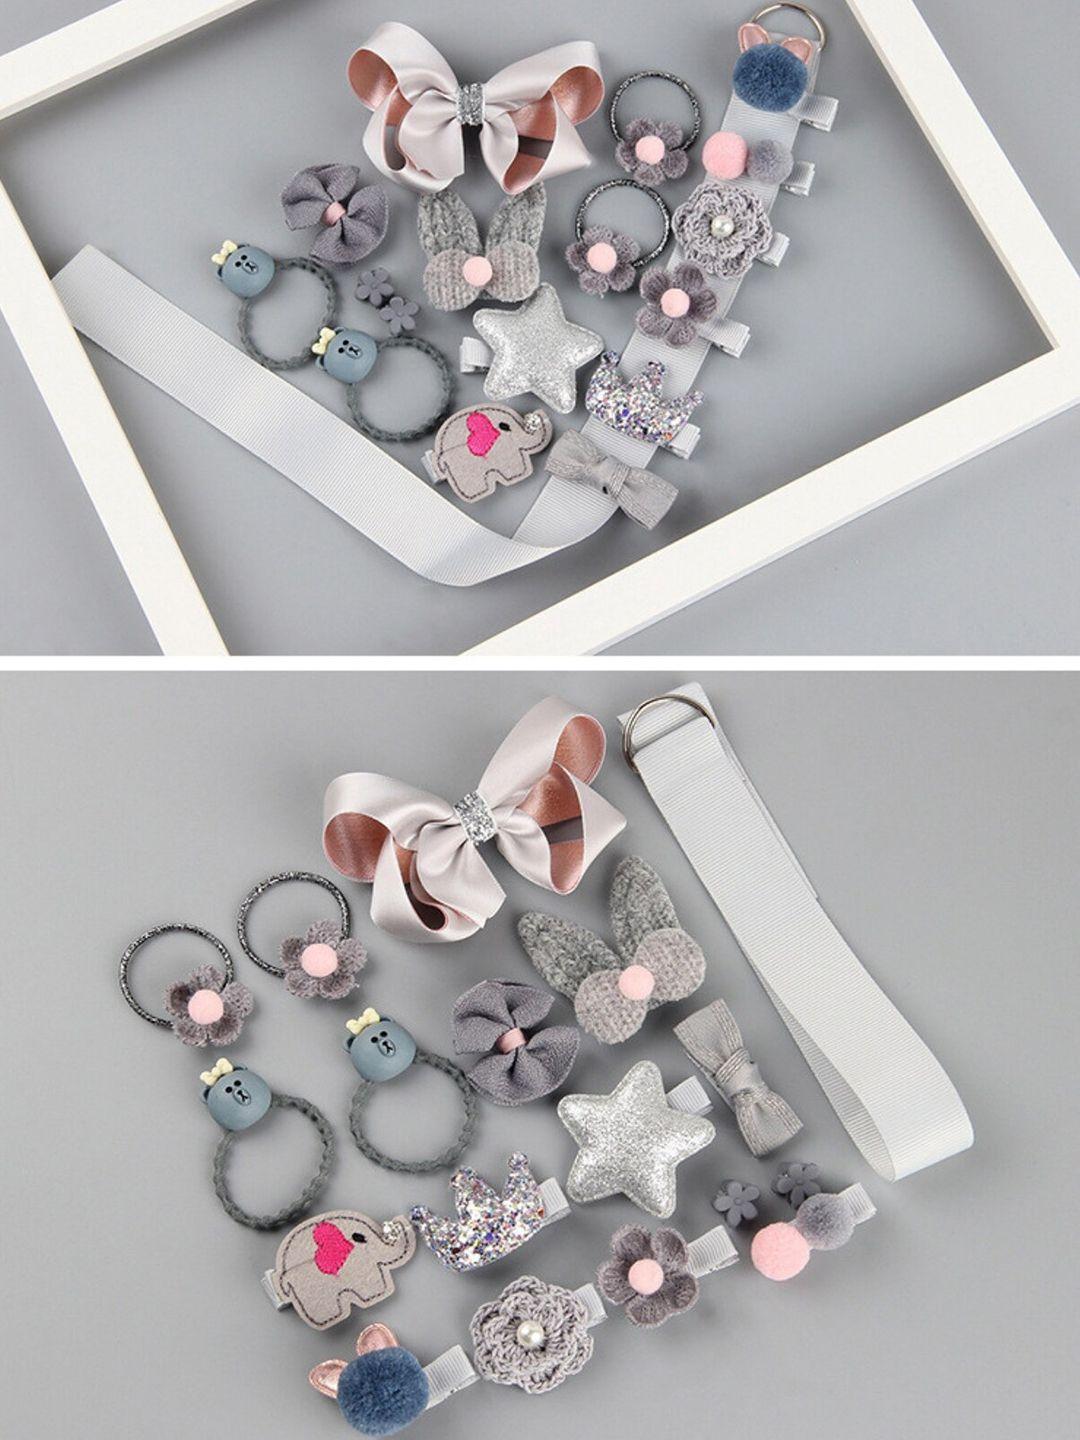 youstylo set of 18 hair accessory set